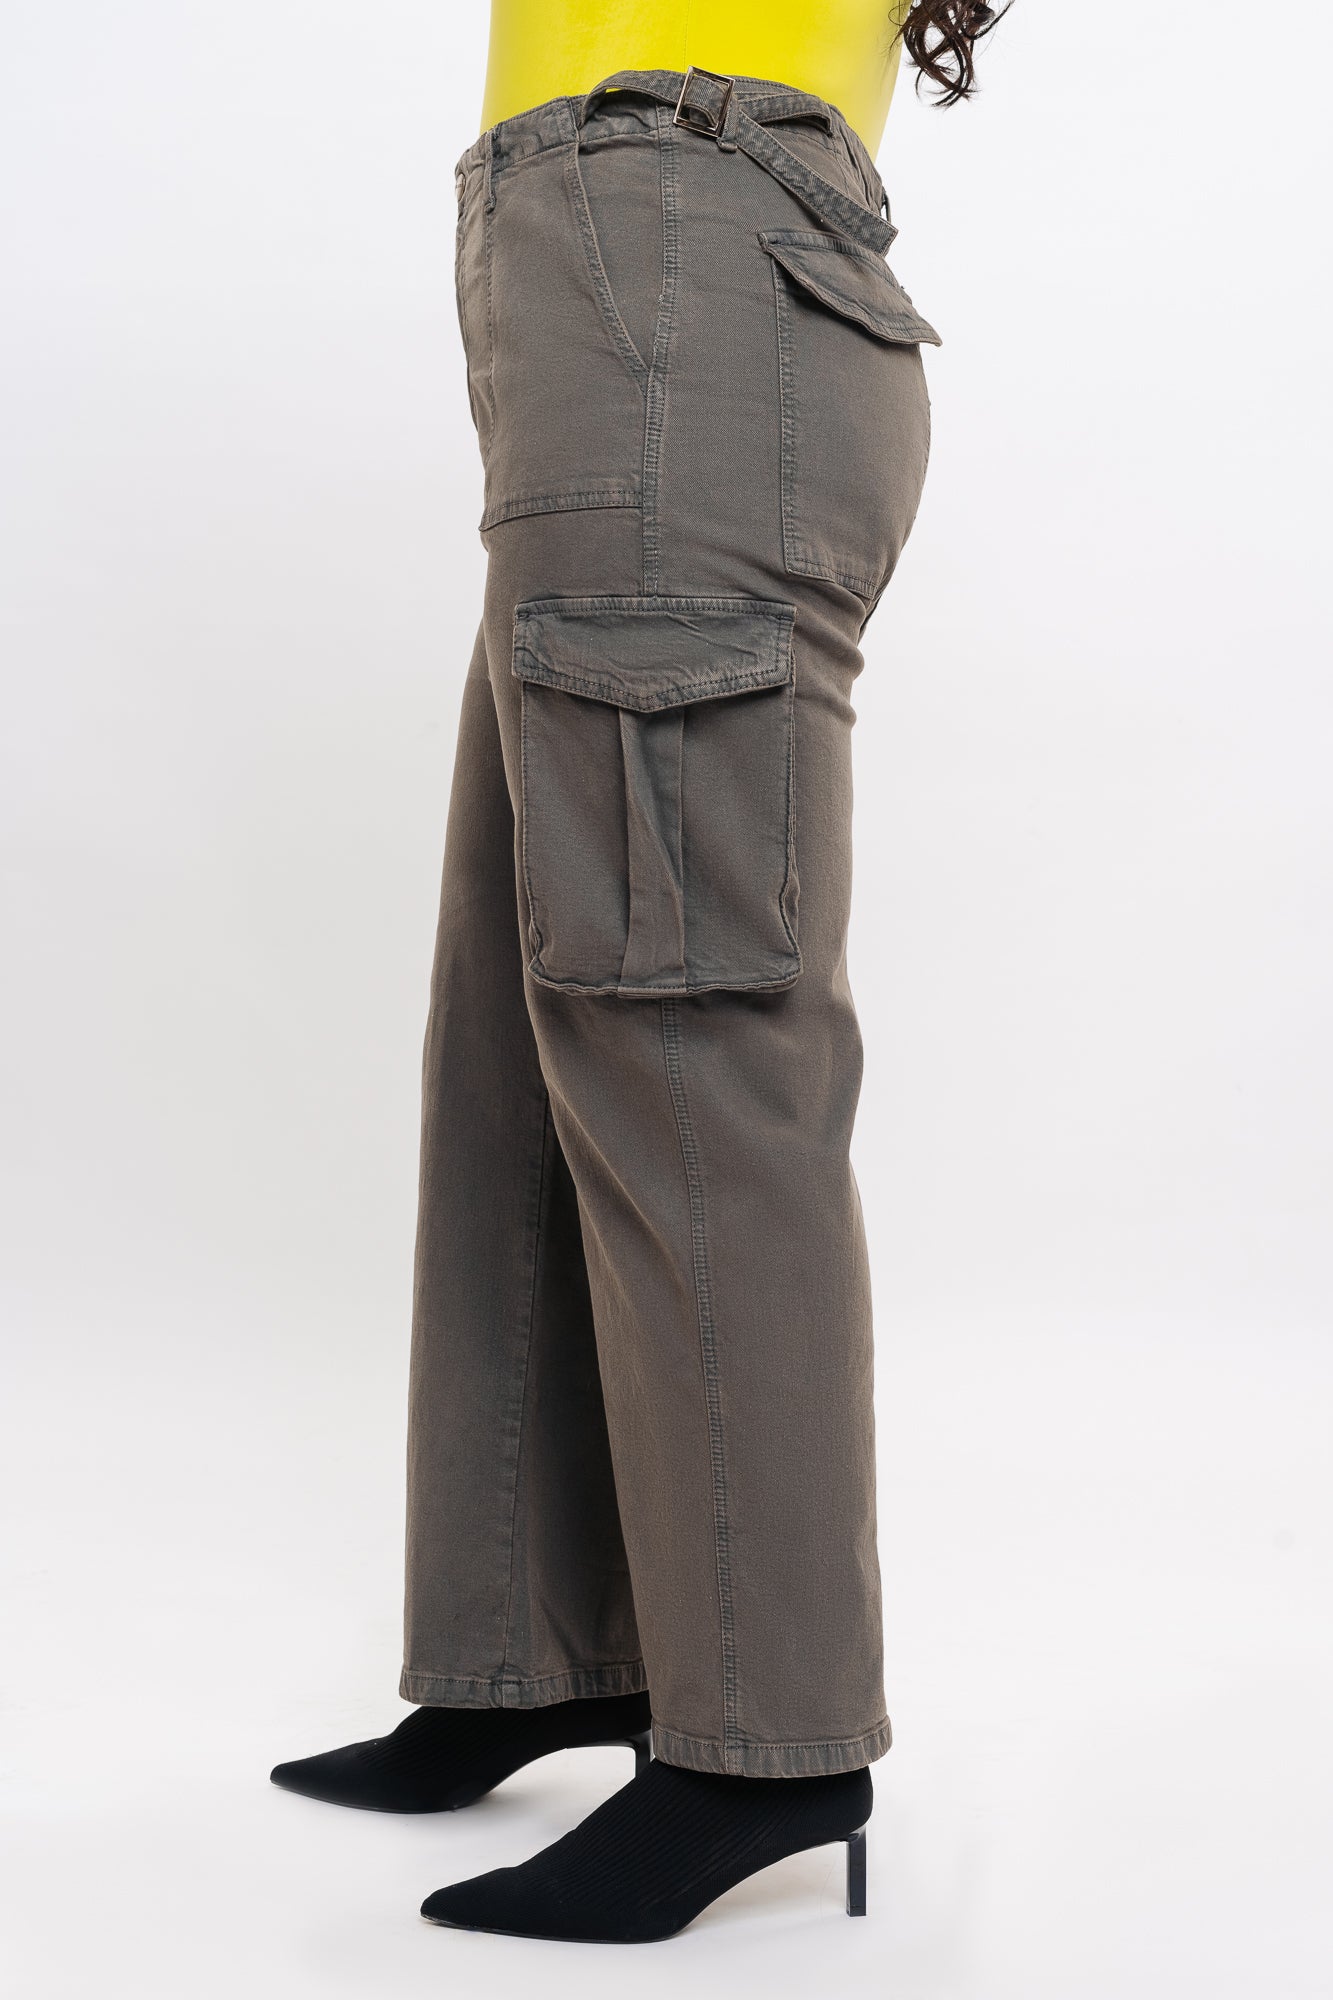 KHAKI GREY WASHED CARGO TROUSER WITH CONTRAST STITCHING